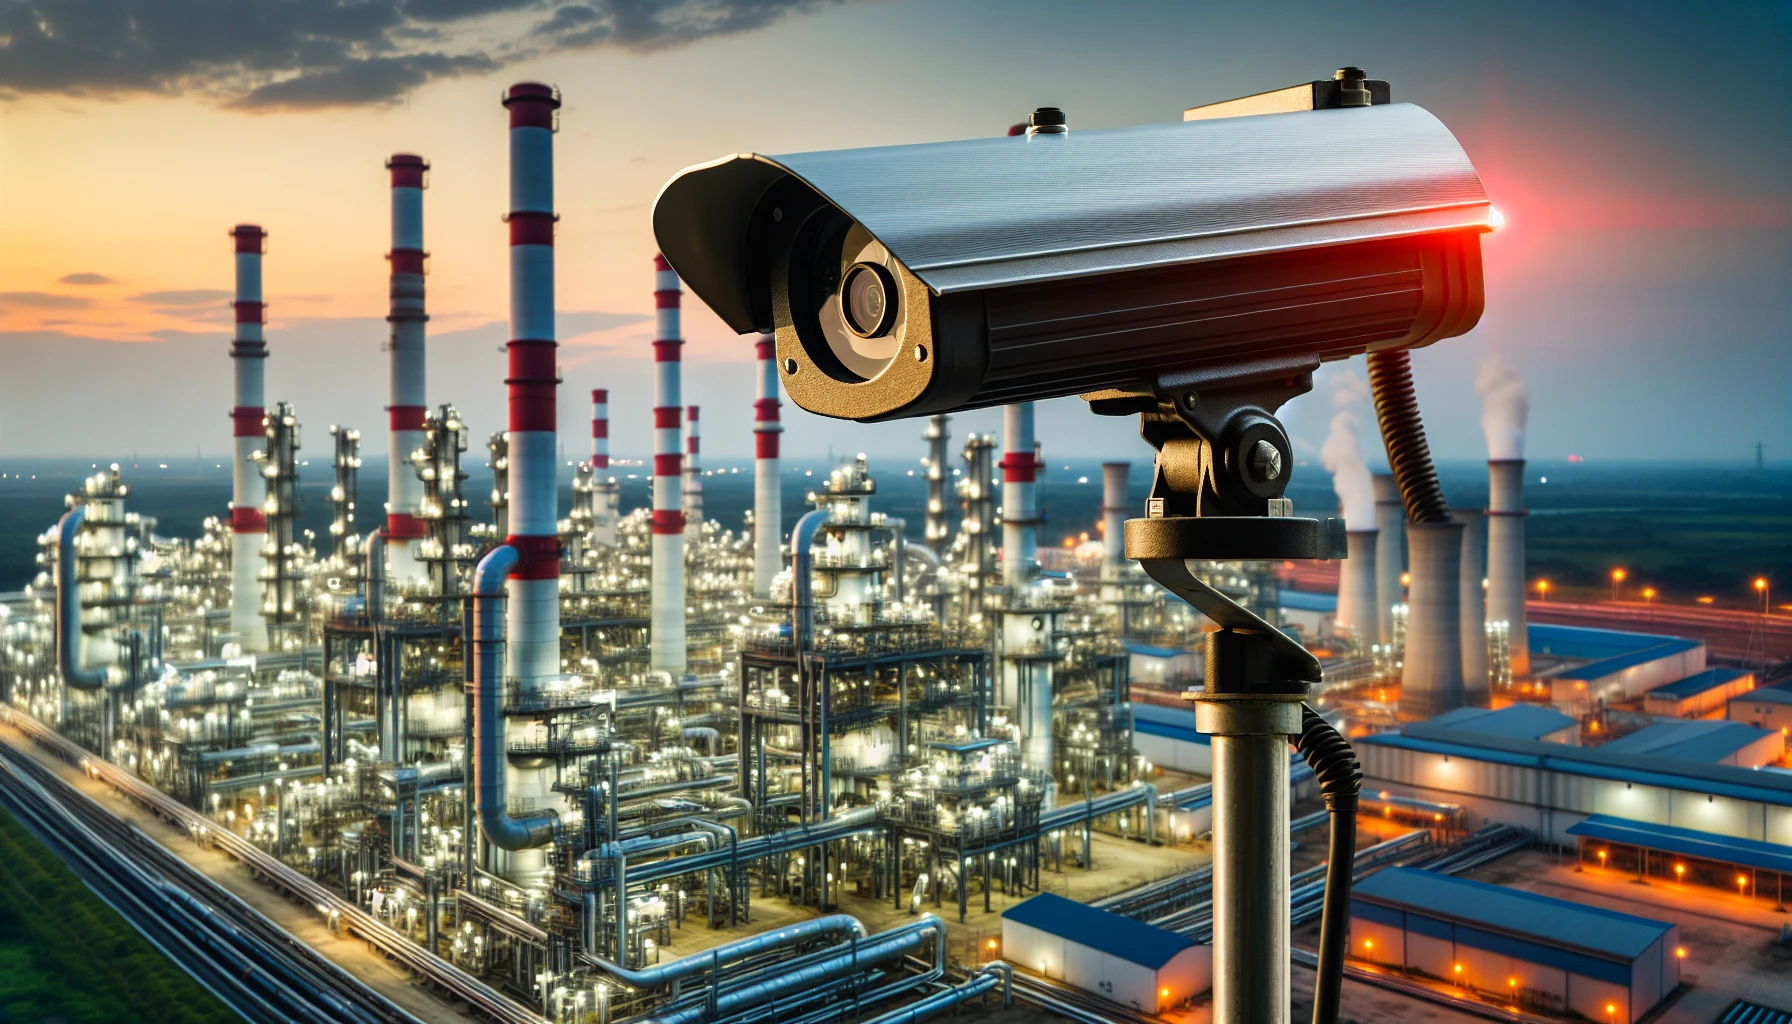 Live monitoring security camera overlooking a power plant